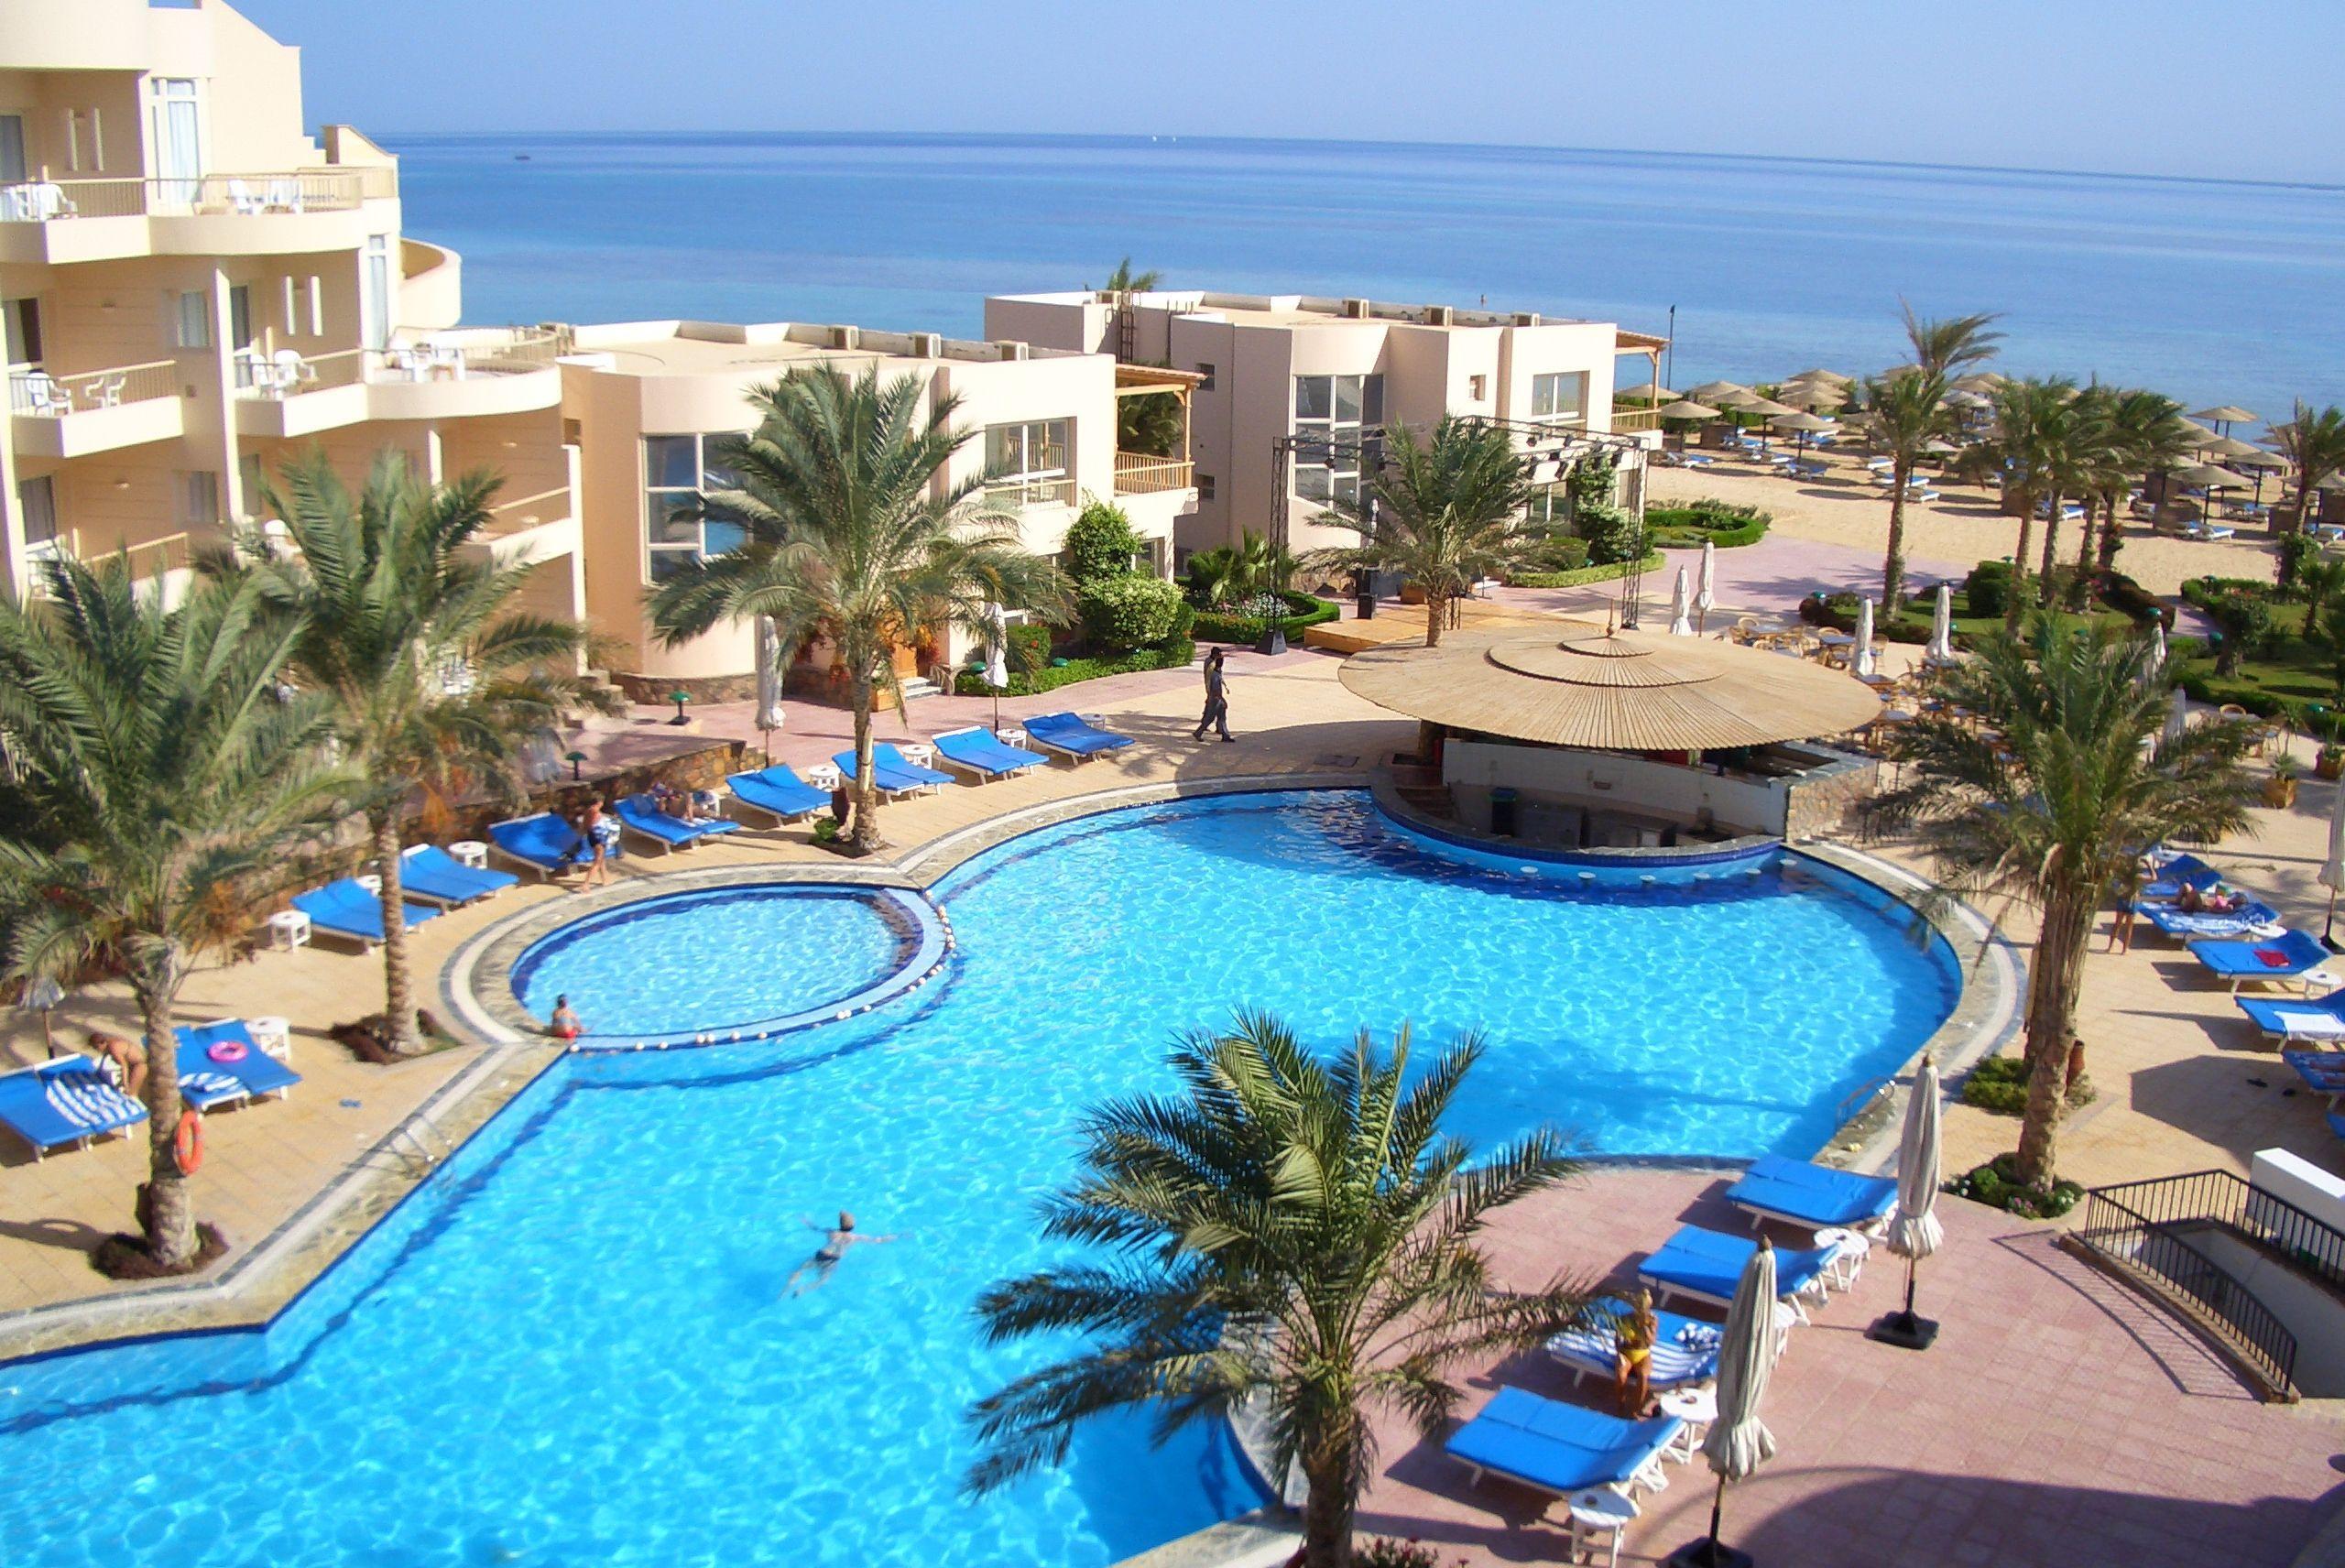 Hotels on the beach in the resort of Hurghada, Egypt wallpaper